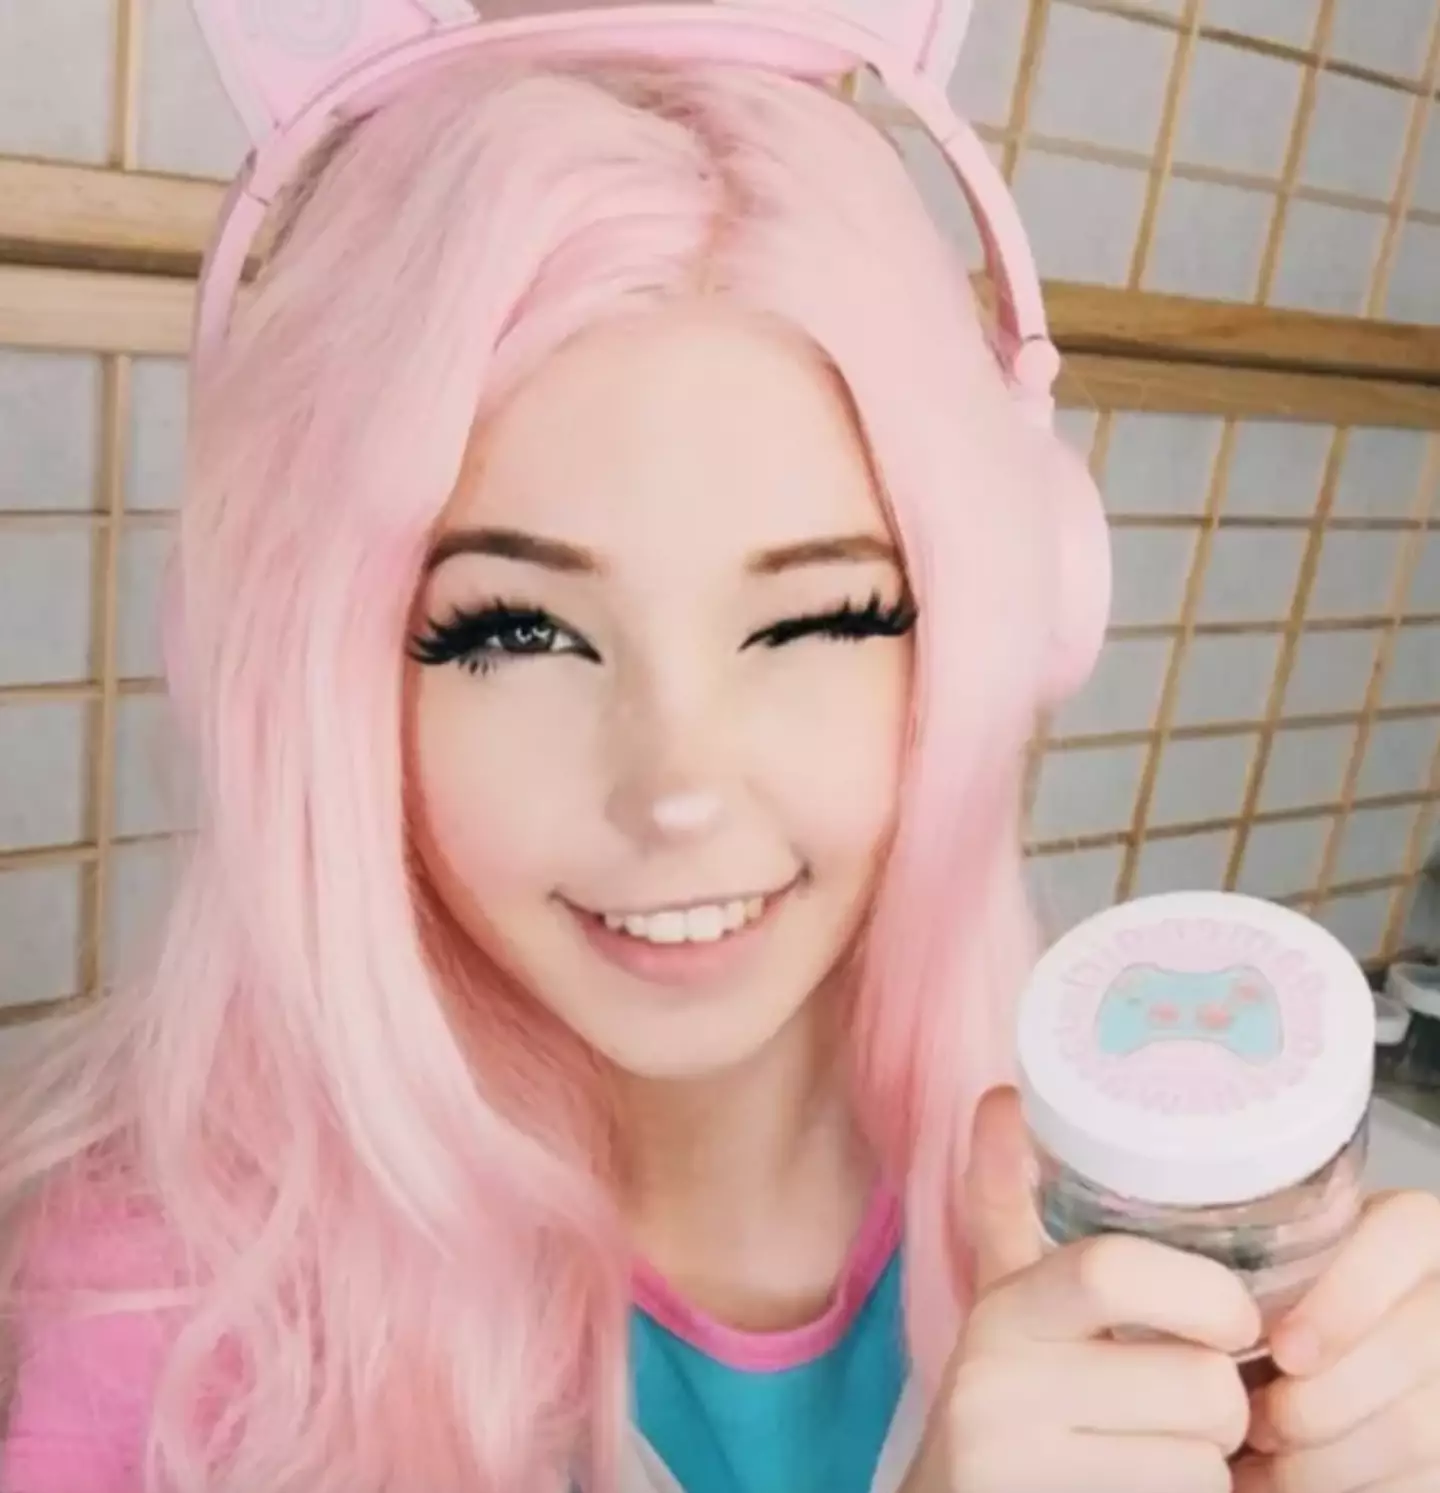 Belle Delphine began to sell her bathwater in 2019.